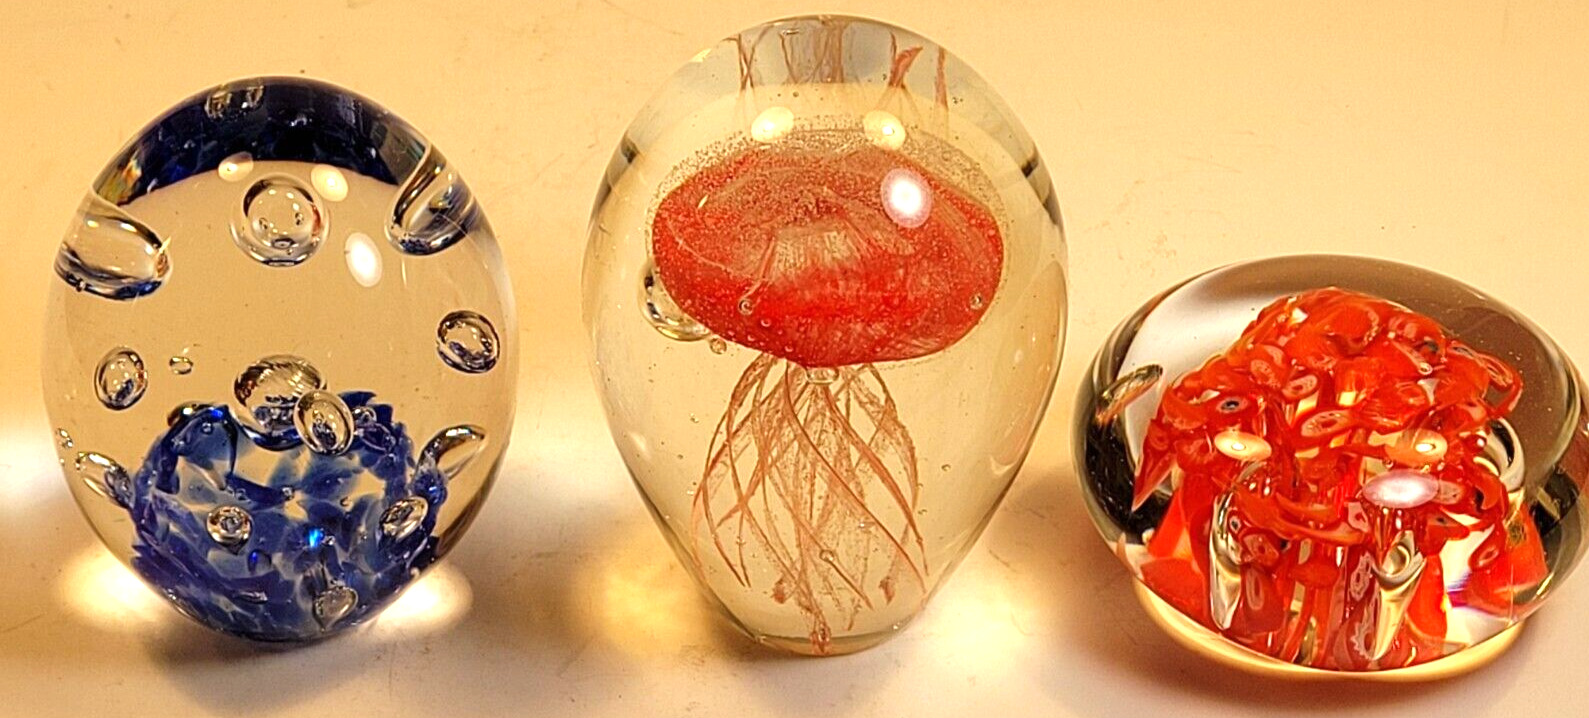 Lot 3 Glass Paperweights Jellyfish Red Blue Clear Blown Bubbles Paper Weights